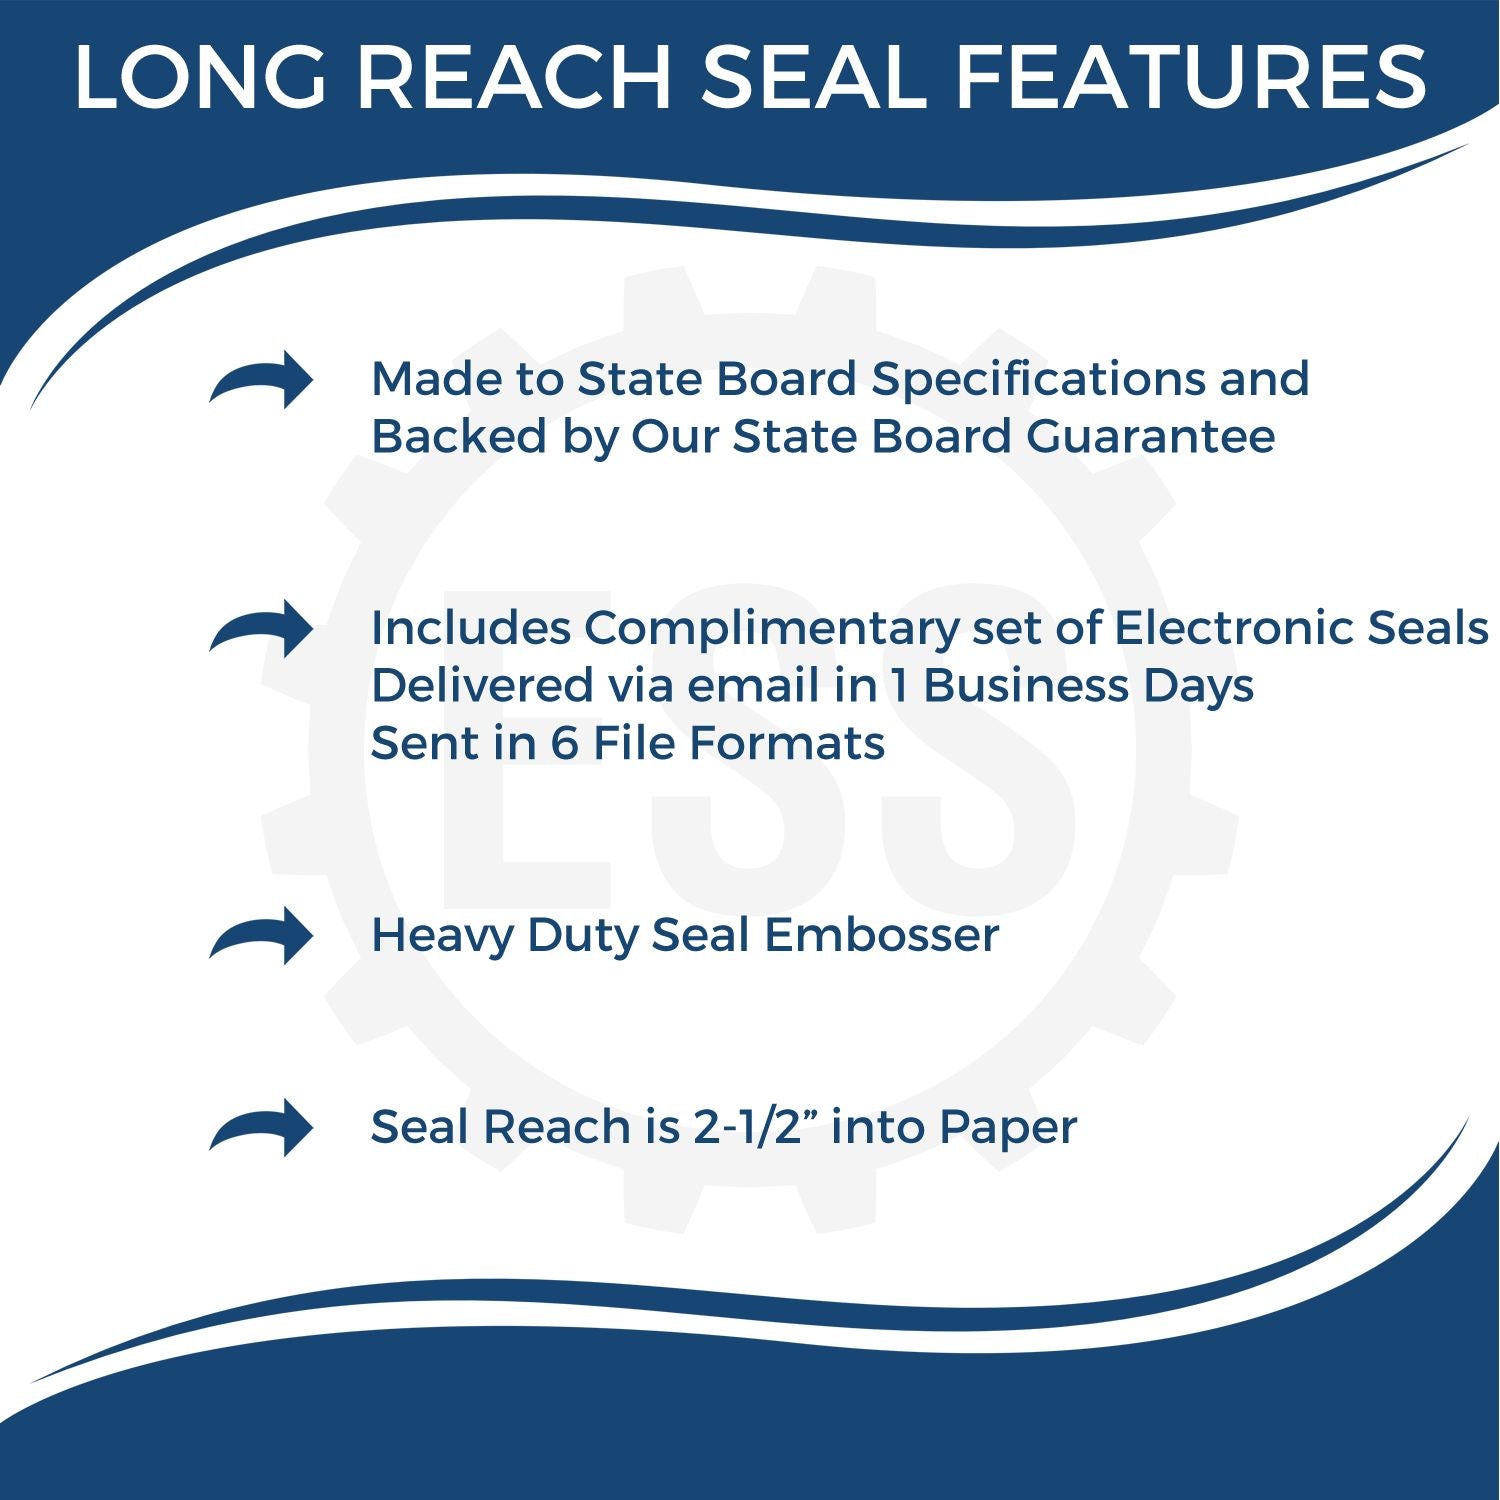 The main image for the Long Reach New Mexico PE Seal depicting a sample of the imprint and electronic files